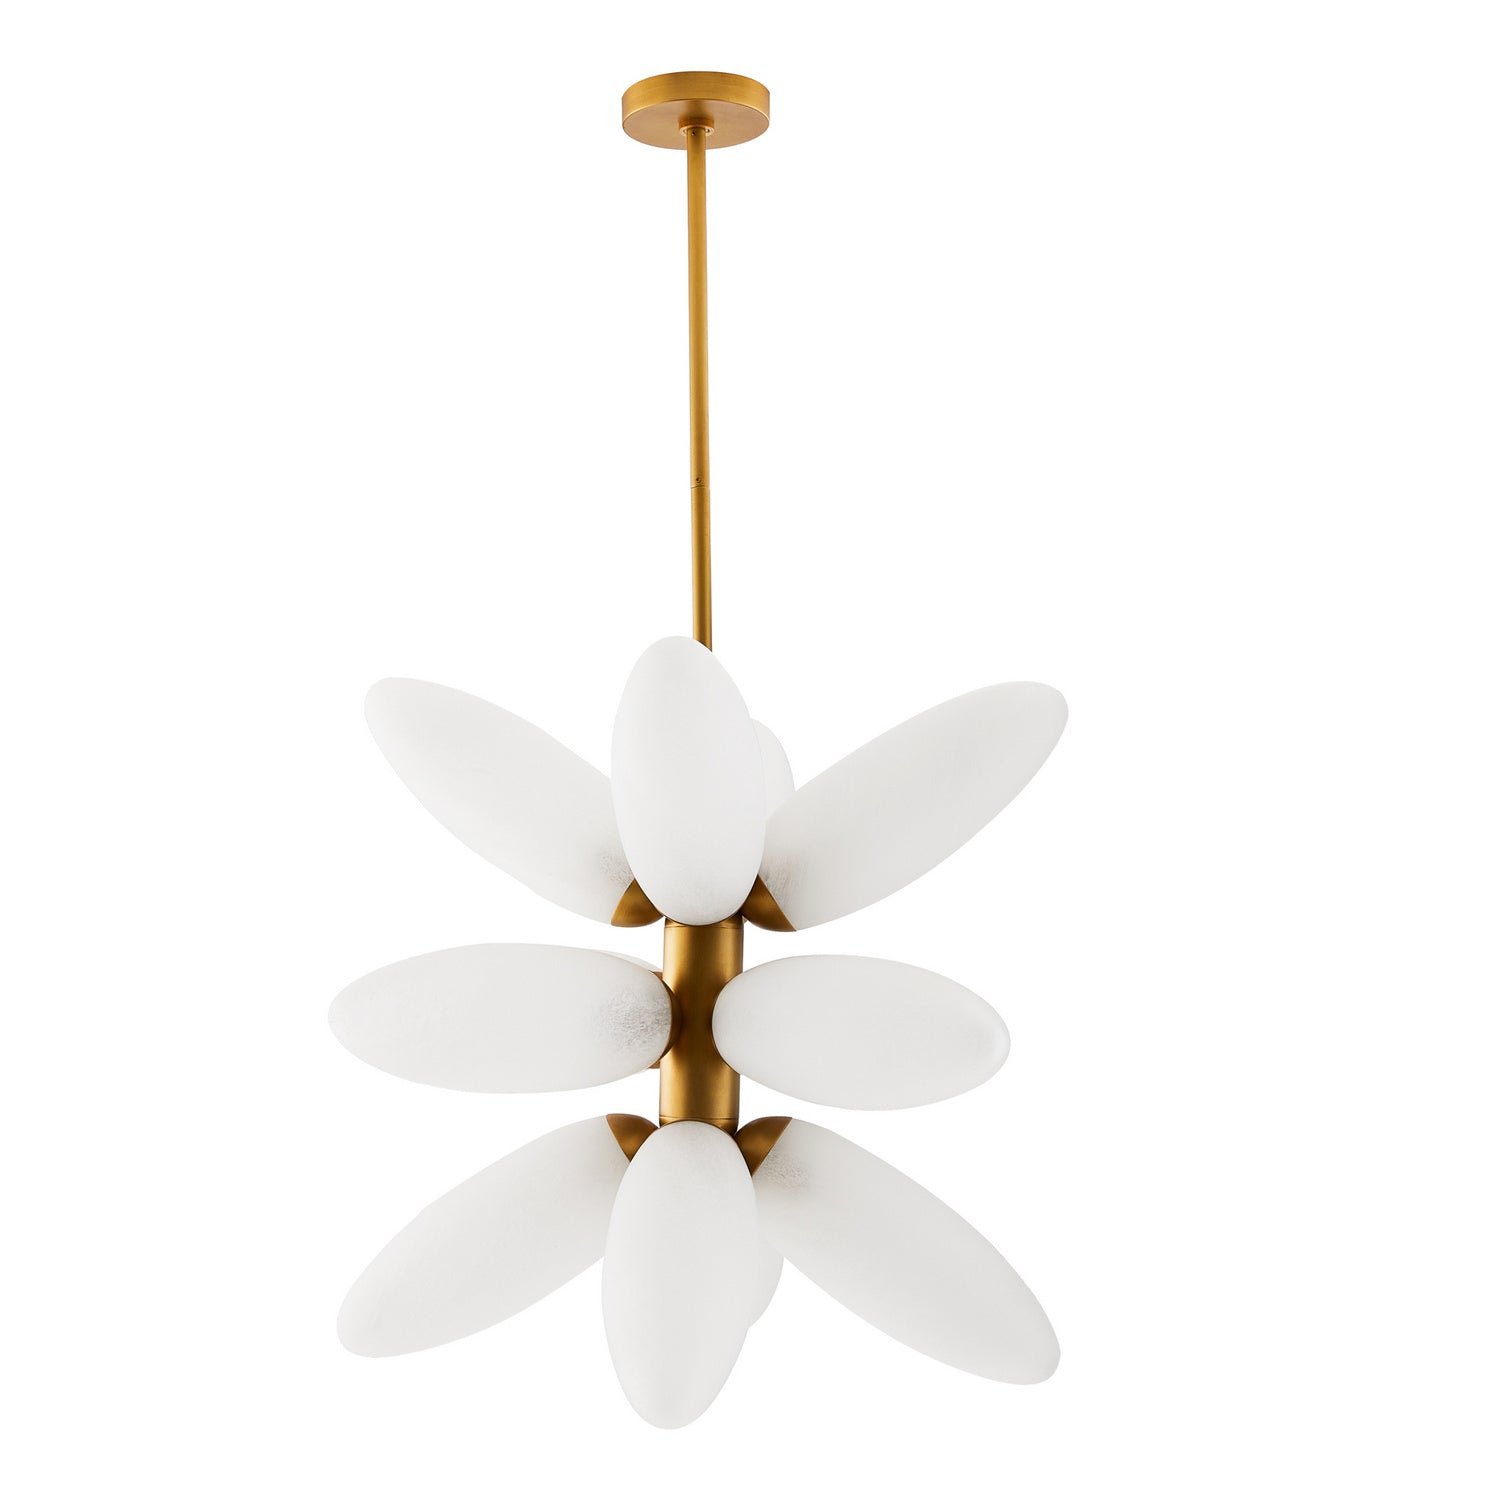 12 Light Chandelier from the Starling collection in Brushed Brass finish